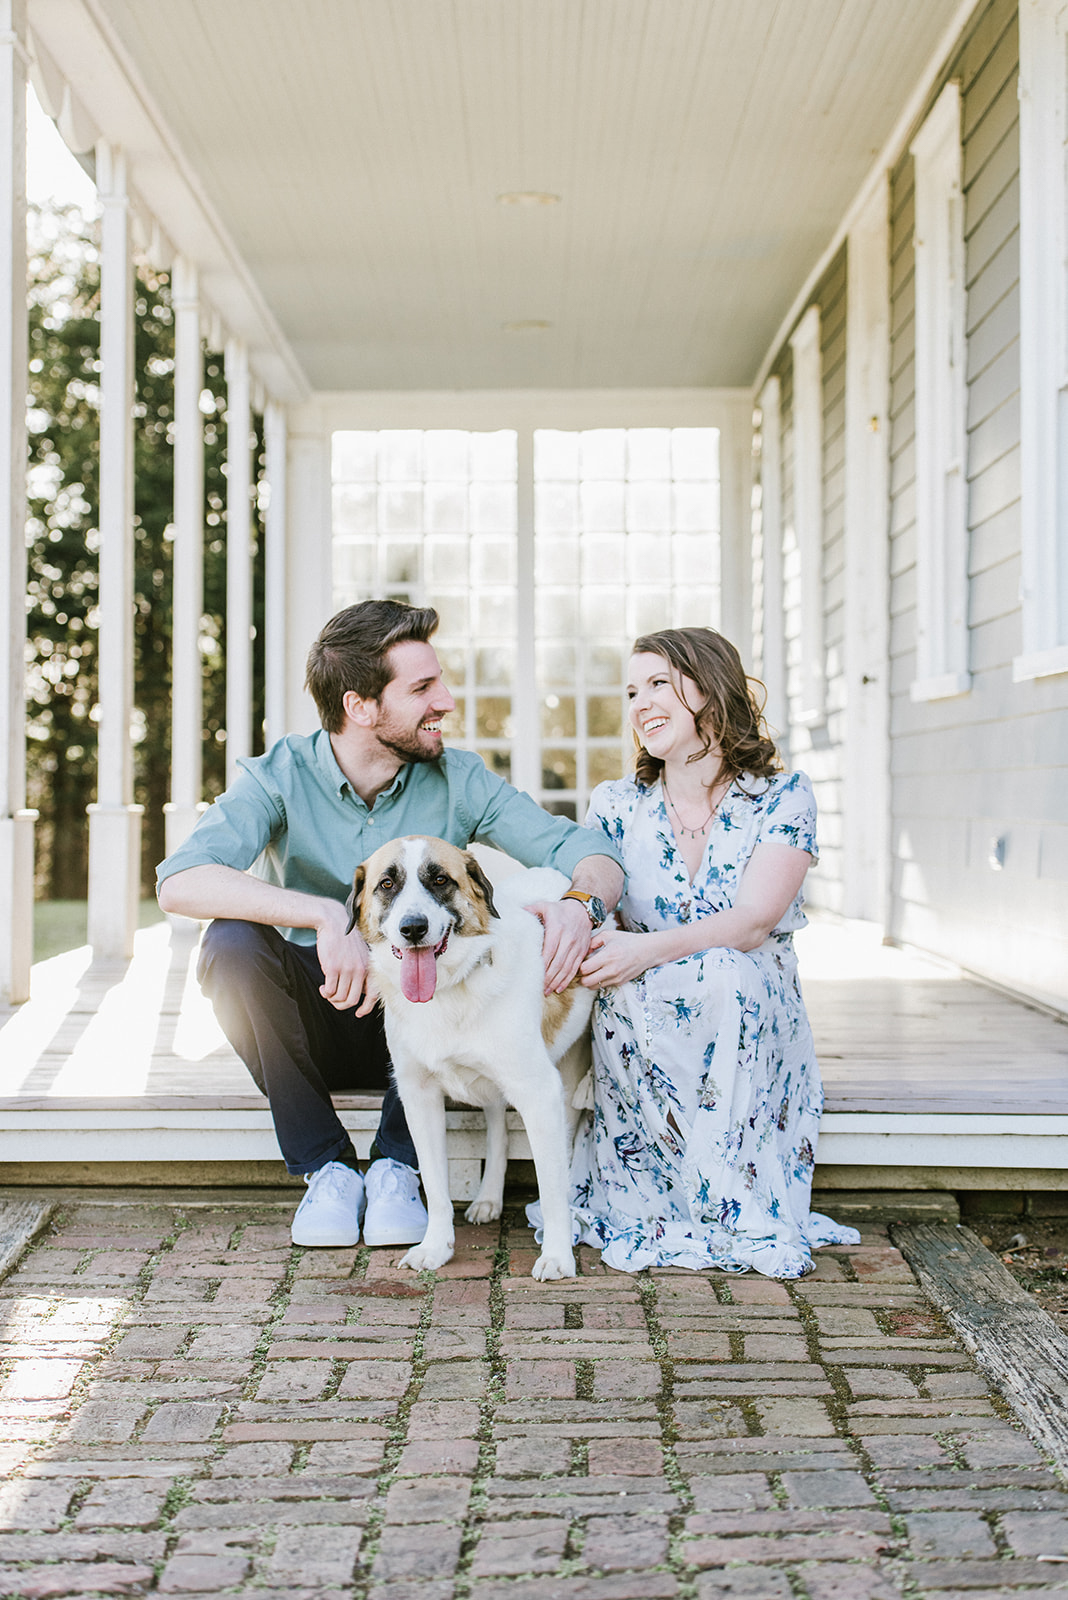 Bringing your dog for your engagement photos